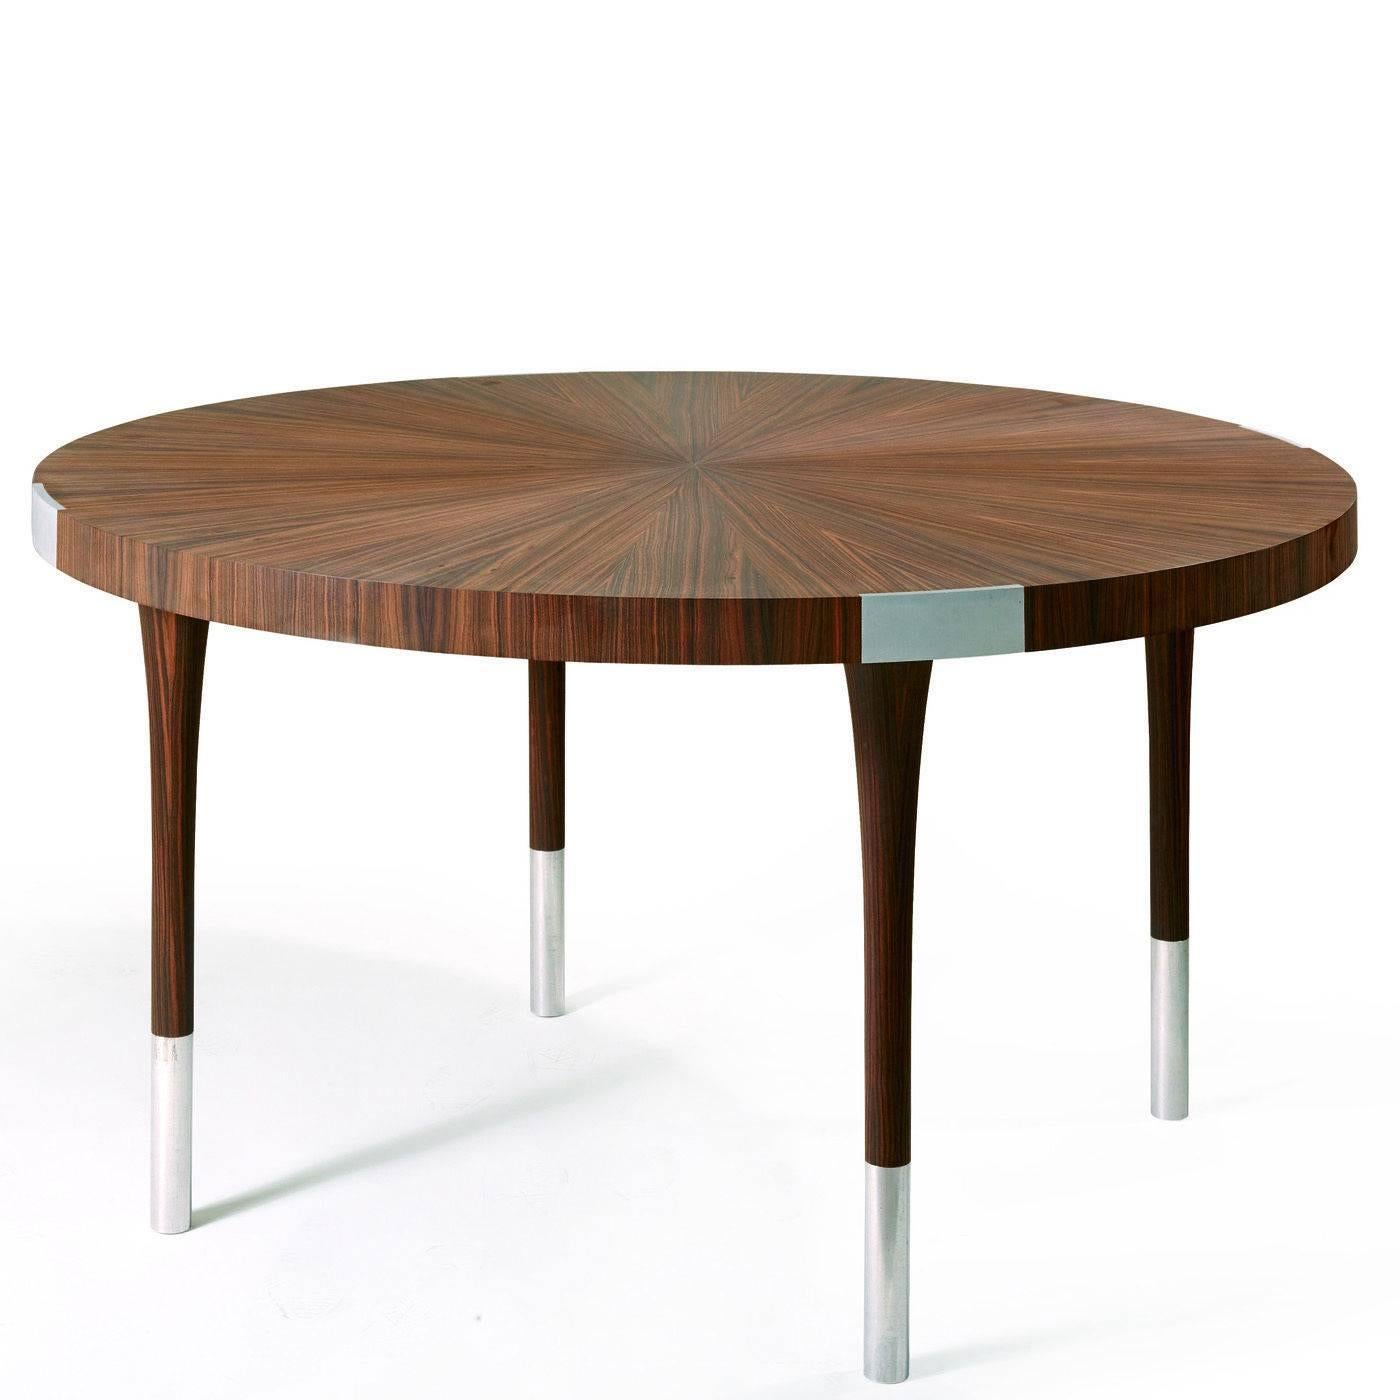 This elegant round table in ebony Macassar wood with its distinctive dark brown strikes, features inserts in aluminum with a satin finish. The top is veneered with a traditional 'sun ray' inlay technique, where the veining of the outer layers are